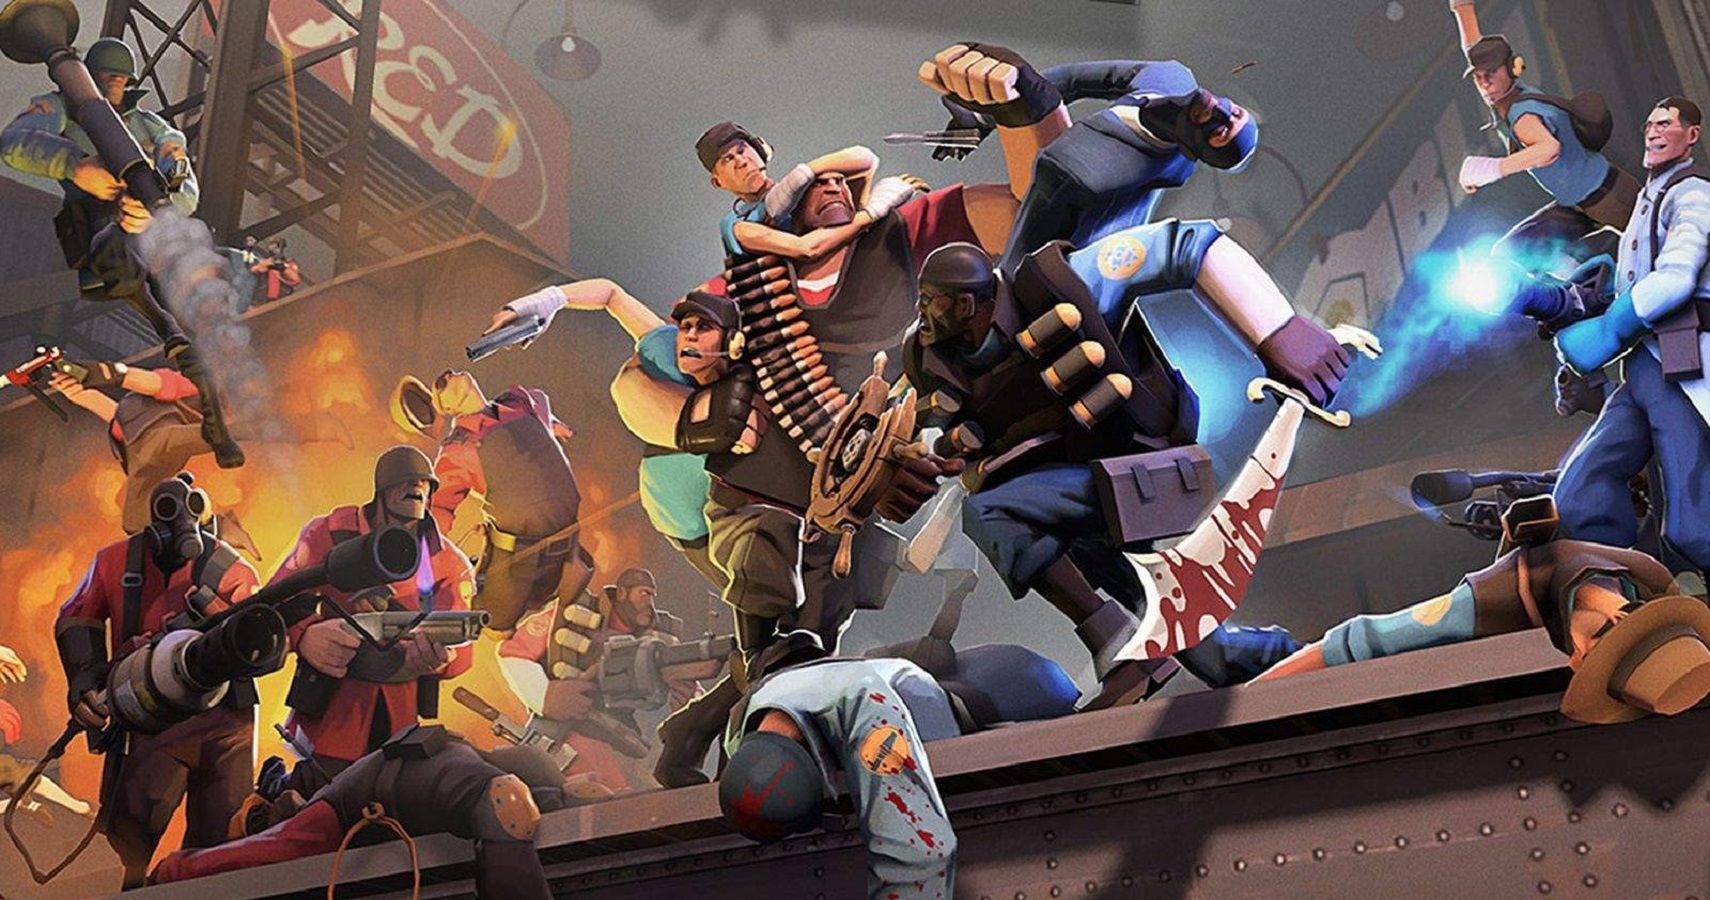 Team Fortress 2 Porn - Team Fortress 2 Is Unplayable Because Of Racist And Explict Bots